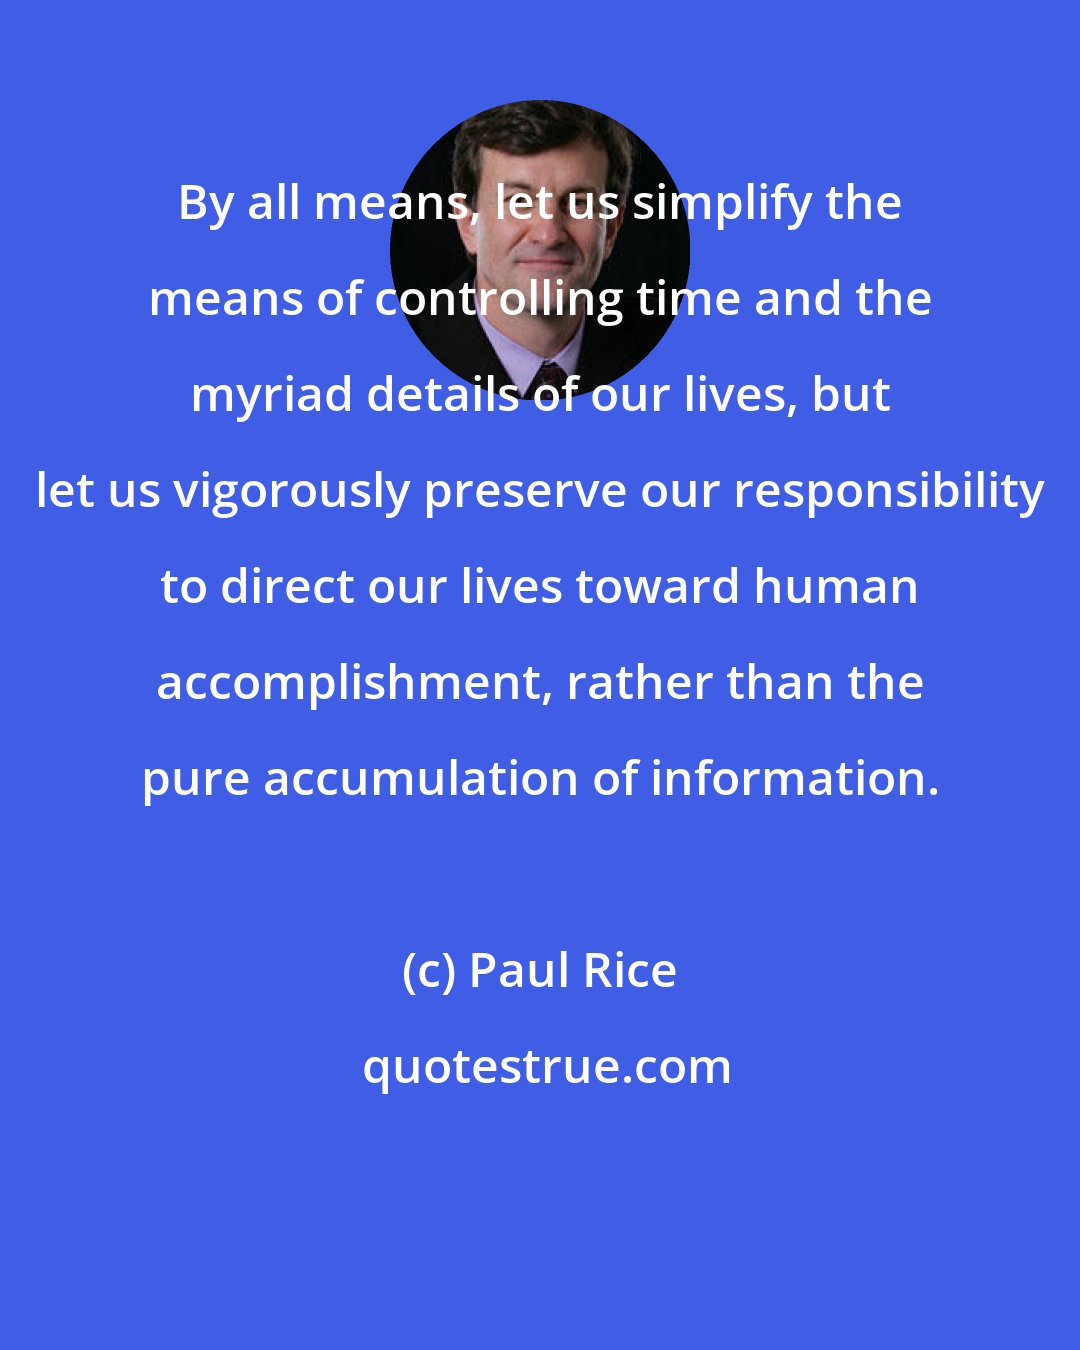 Paul Rice: By all means, let us simplify the means of controlling time and the myriad details of our lives, but let us vigorously preserve our responsibility to direct our lives toward human accomplishment, rather than the pure accumulation of information.